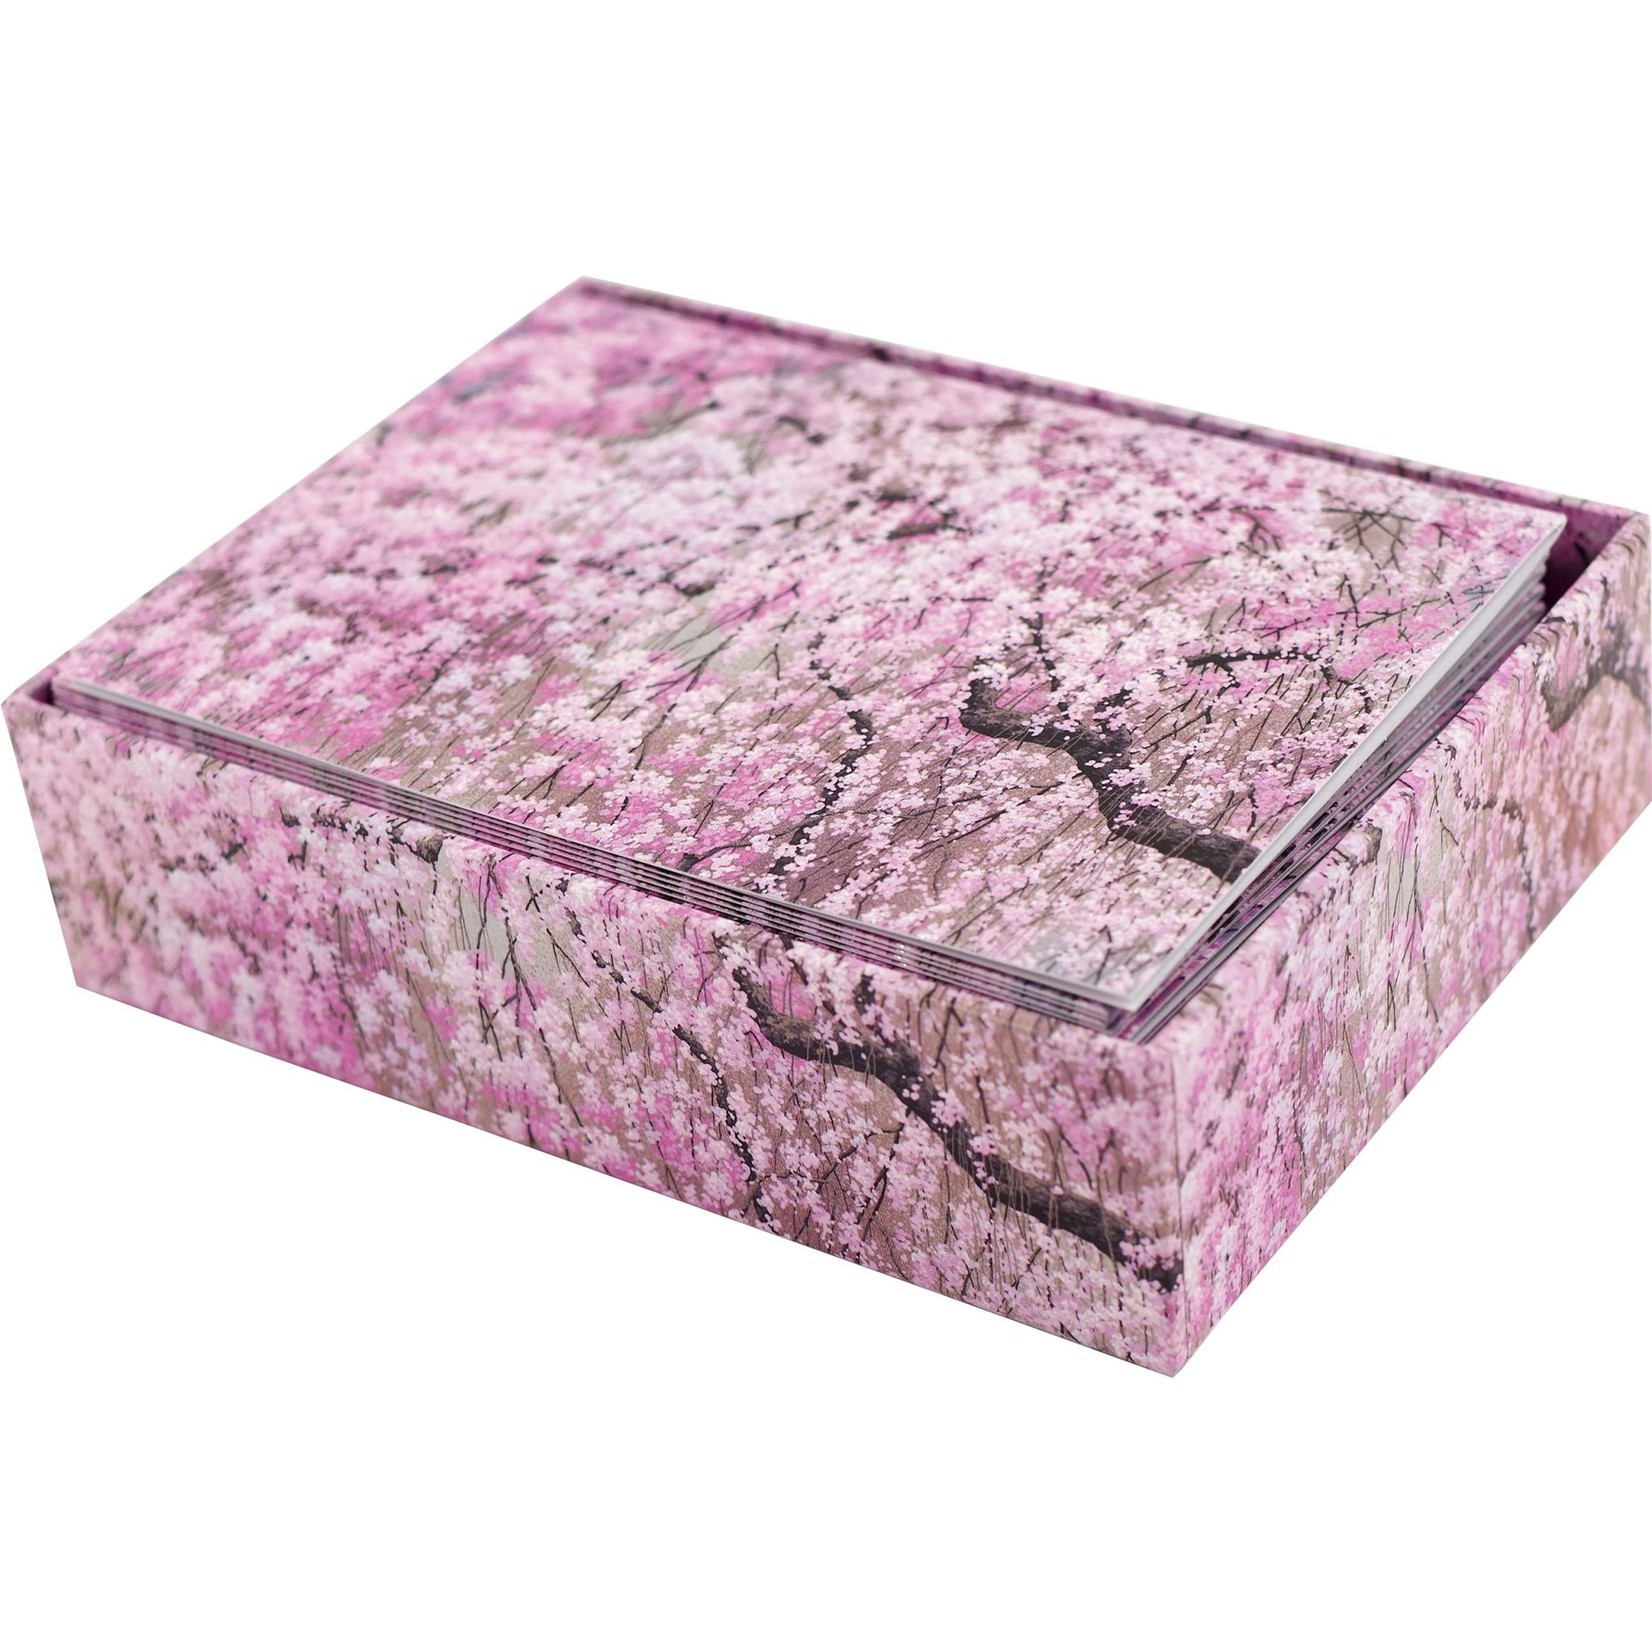 Peter Pauper Press Boxed Note Cards: Cherry Blossoms